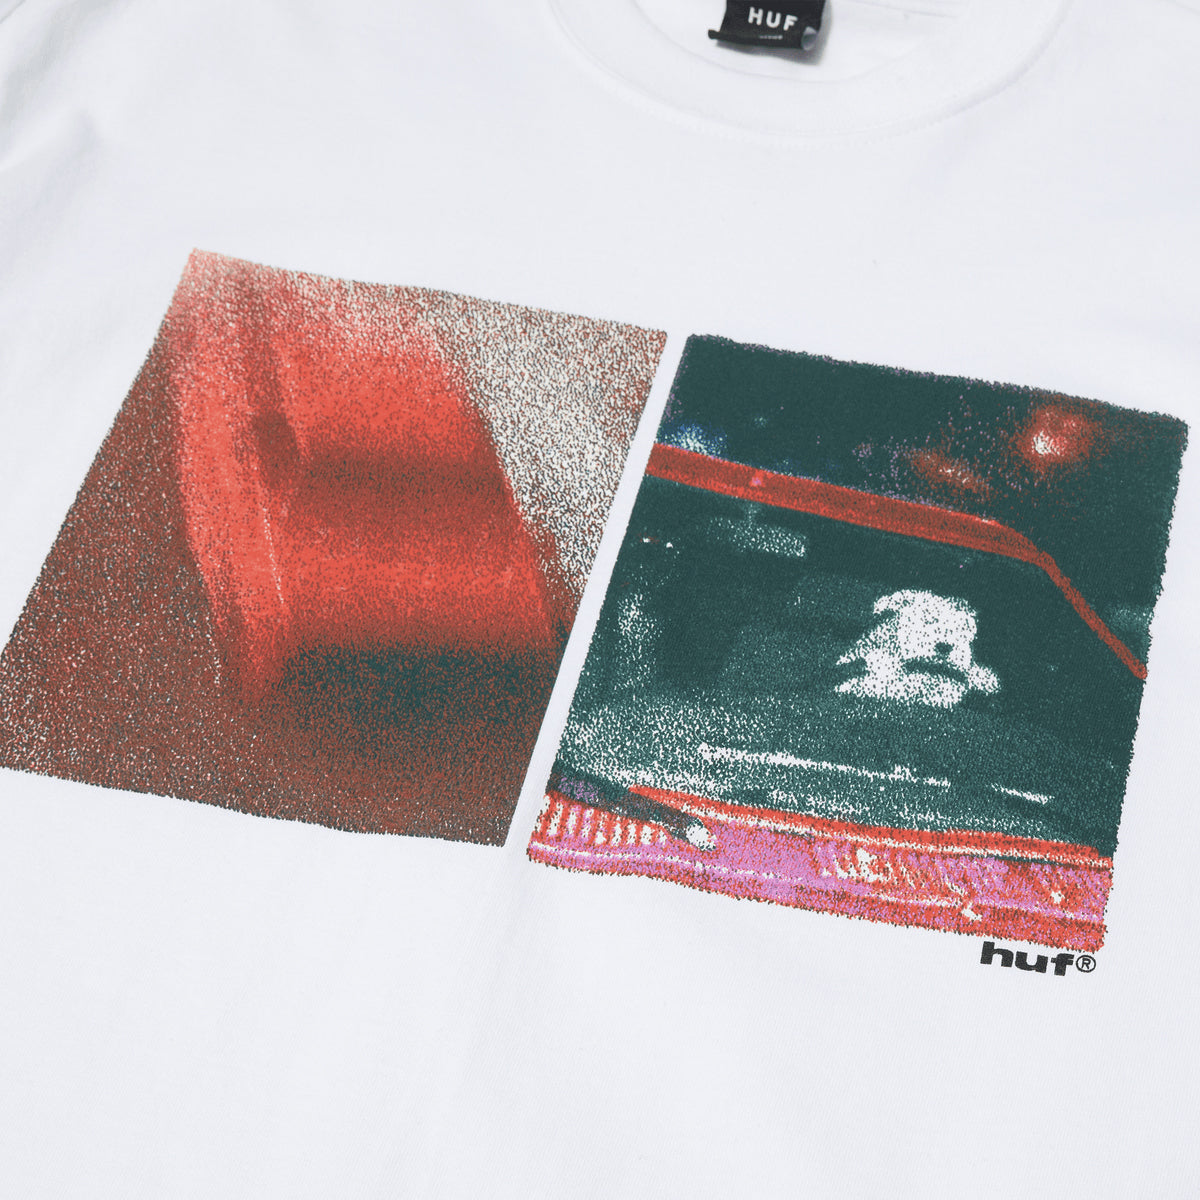 HUF Red Means Go Long Sleeve T-Shirt - White image 2